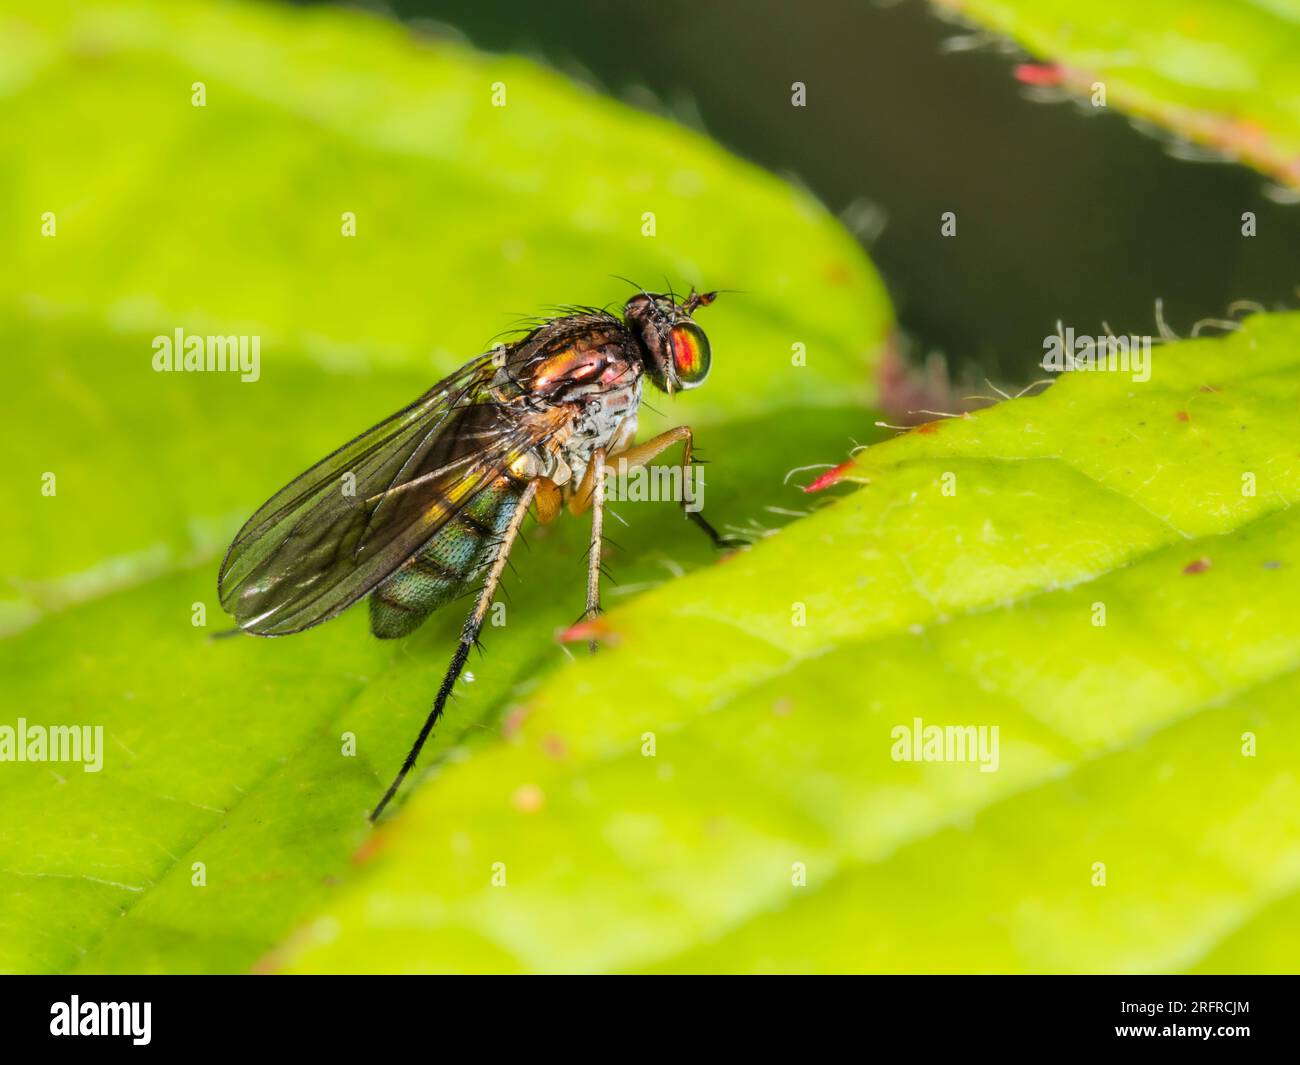 Reflective, iridescent body of the small long-legged fly, Dolichopus griseipennis, on foliage in a Plymouth, UK hedgerow Stock Photo